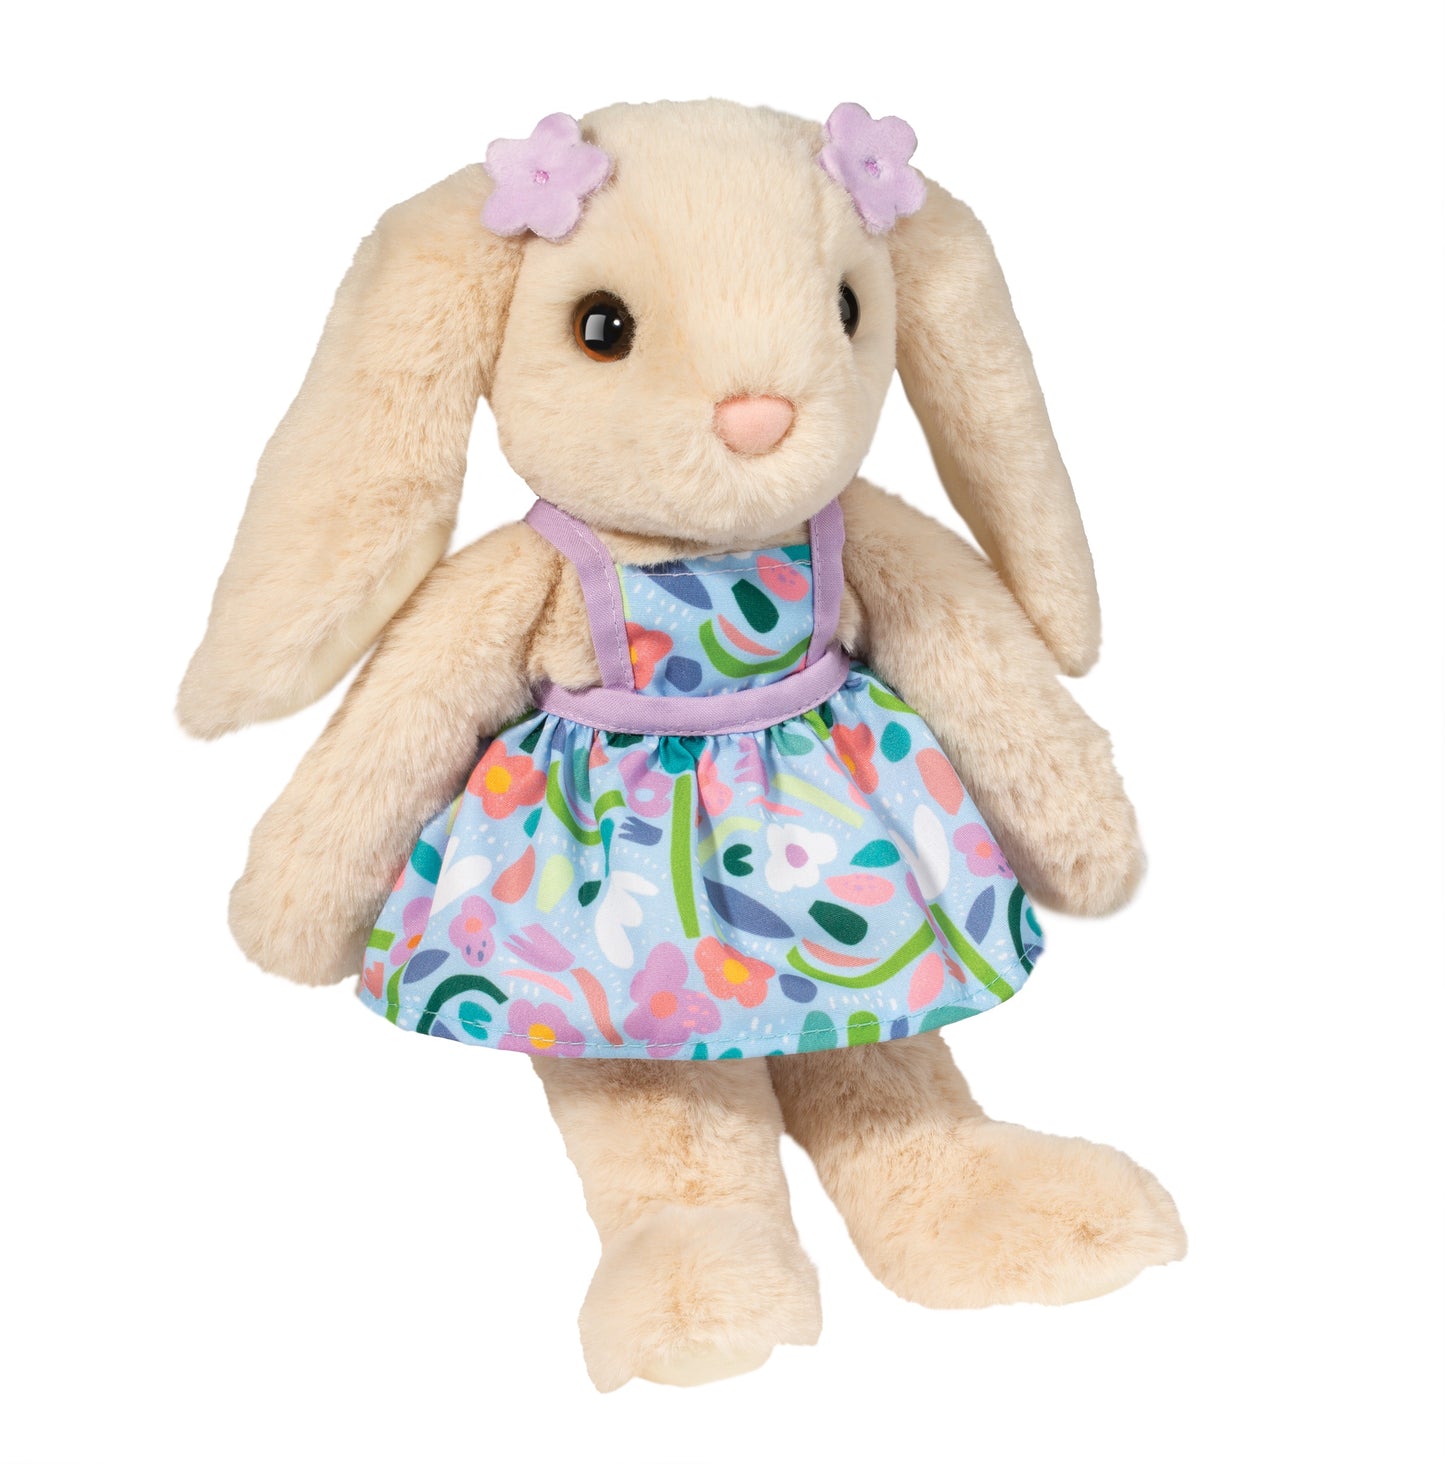 Pearl the Floppy Bunny with Dress Stuffed Animal